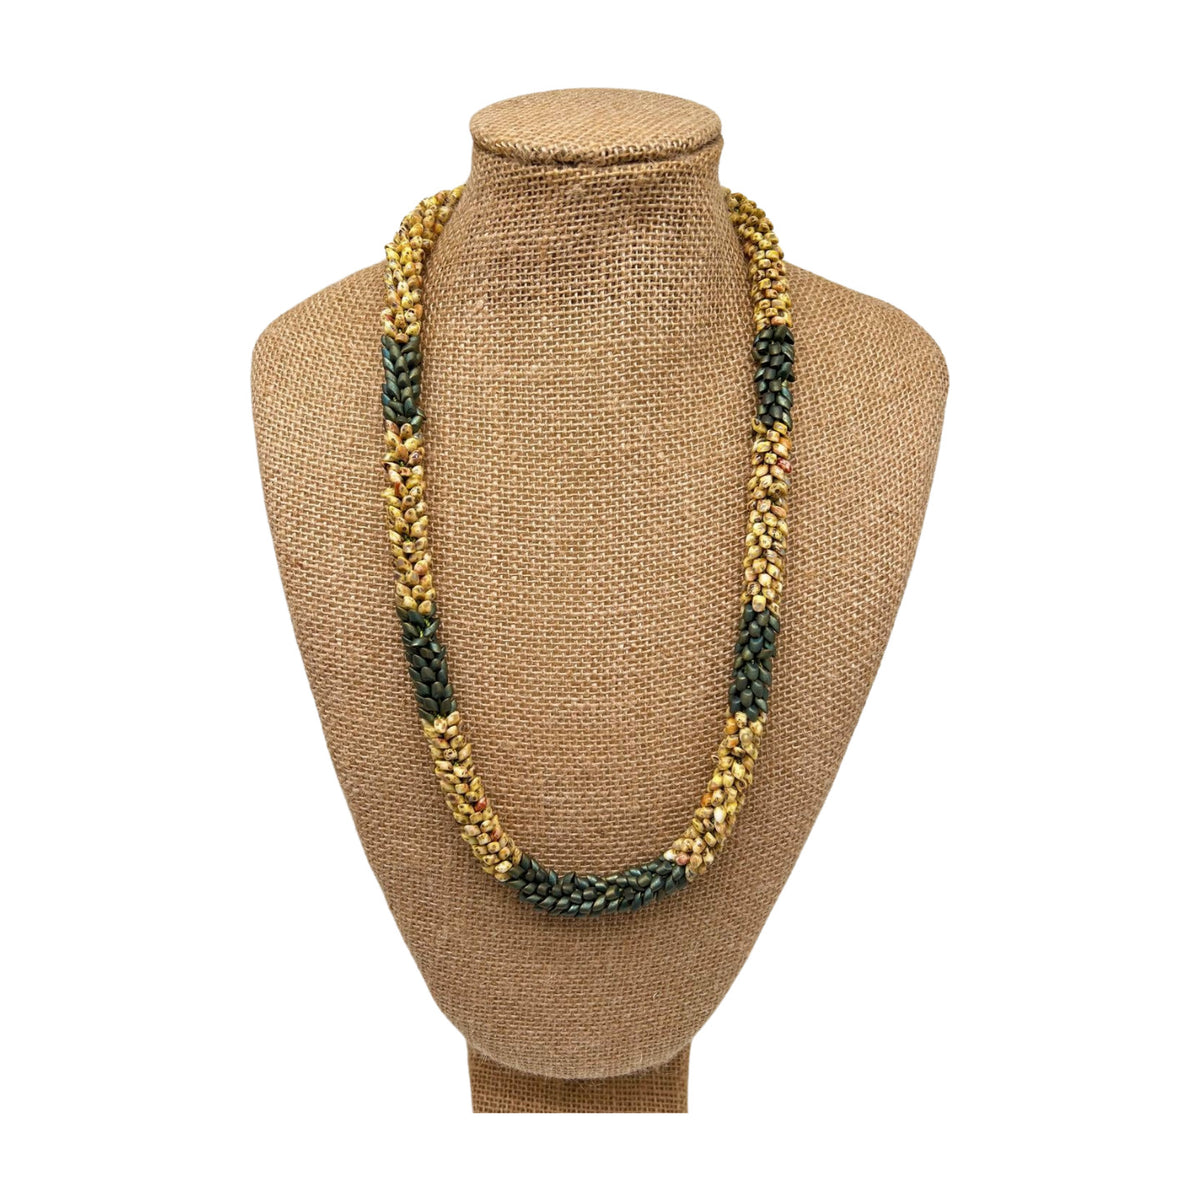 Pop-Up Mākeke - Akalei Designs - Picasso Yellow &amp; Metallic Green Dragon Scales Necklace  - 27in - Front View